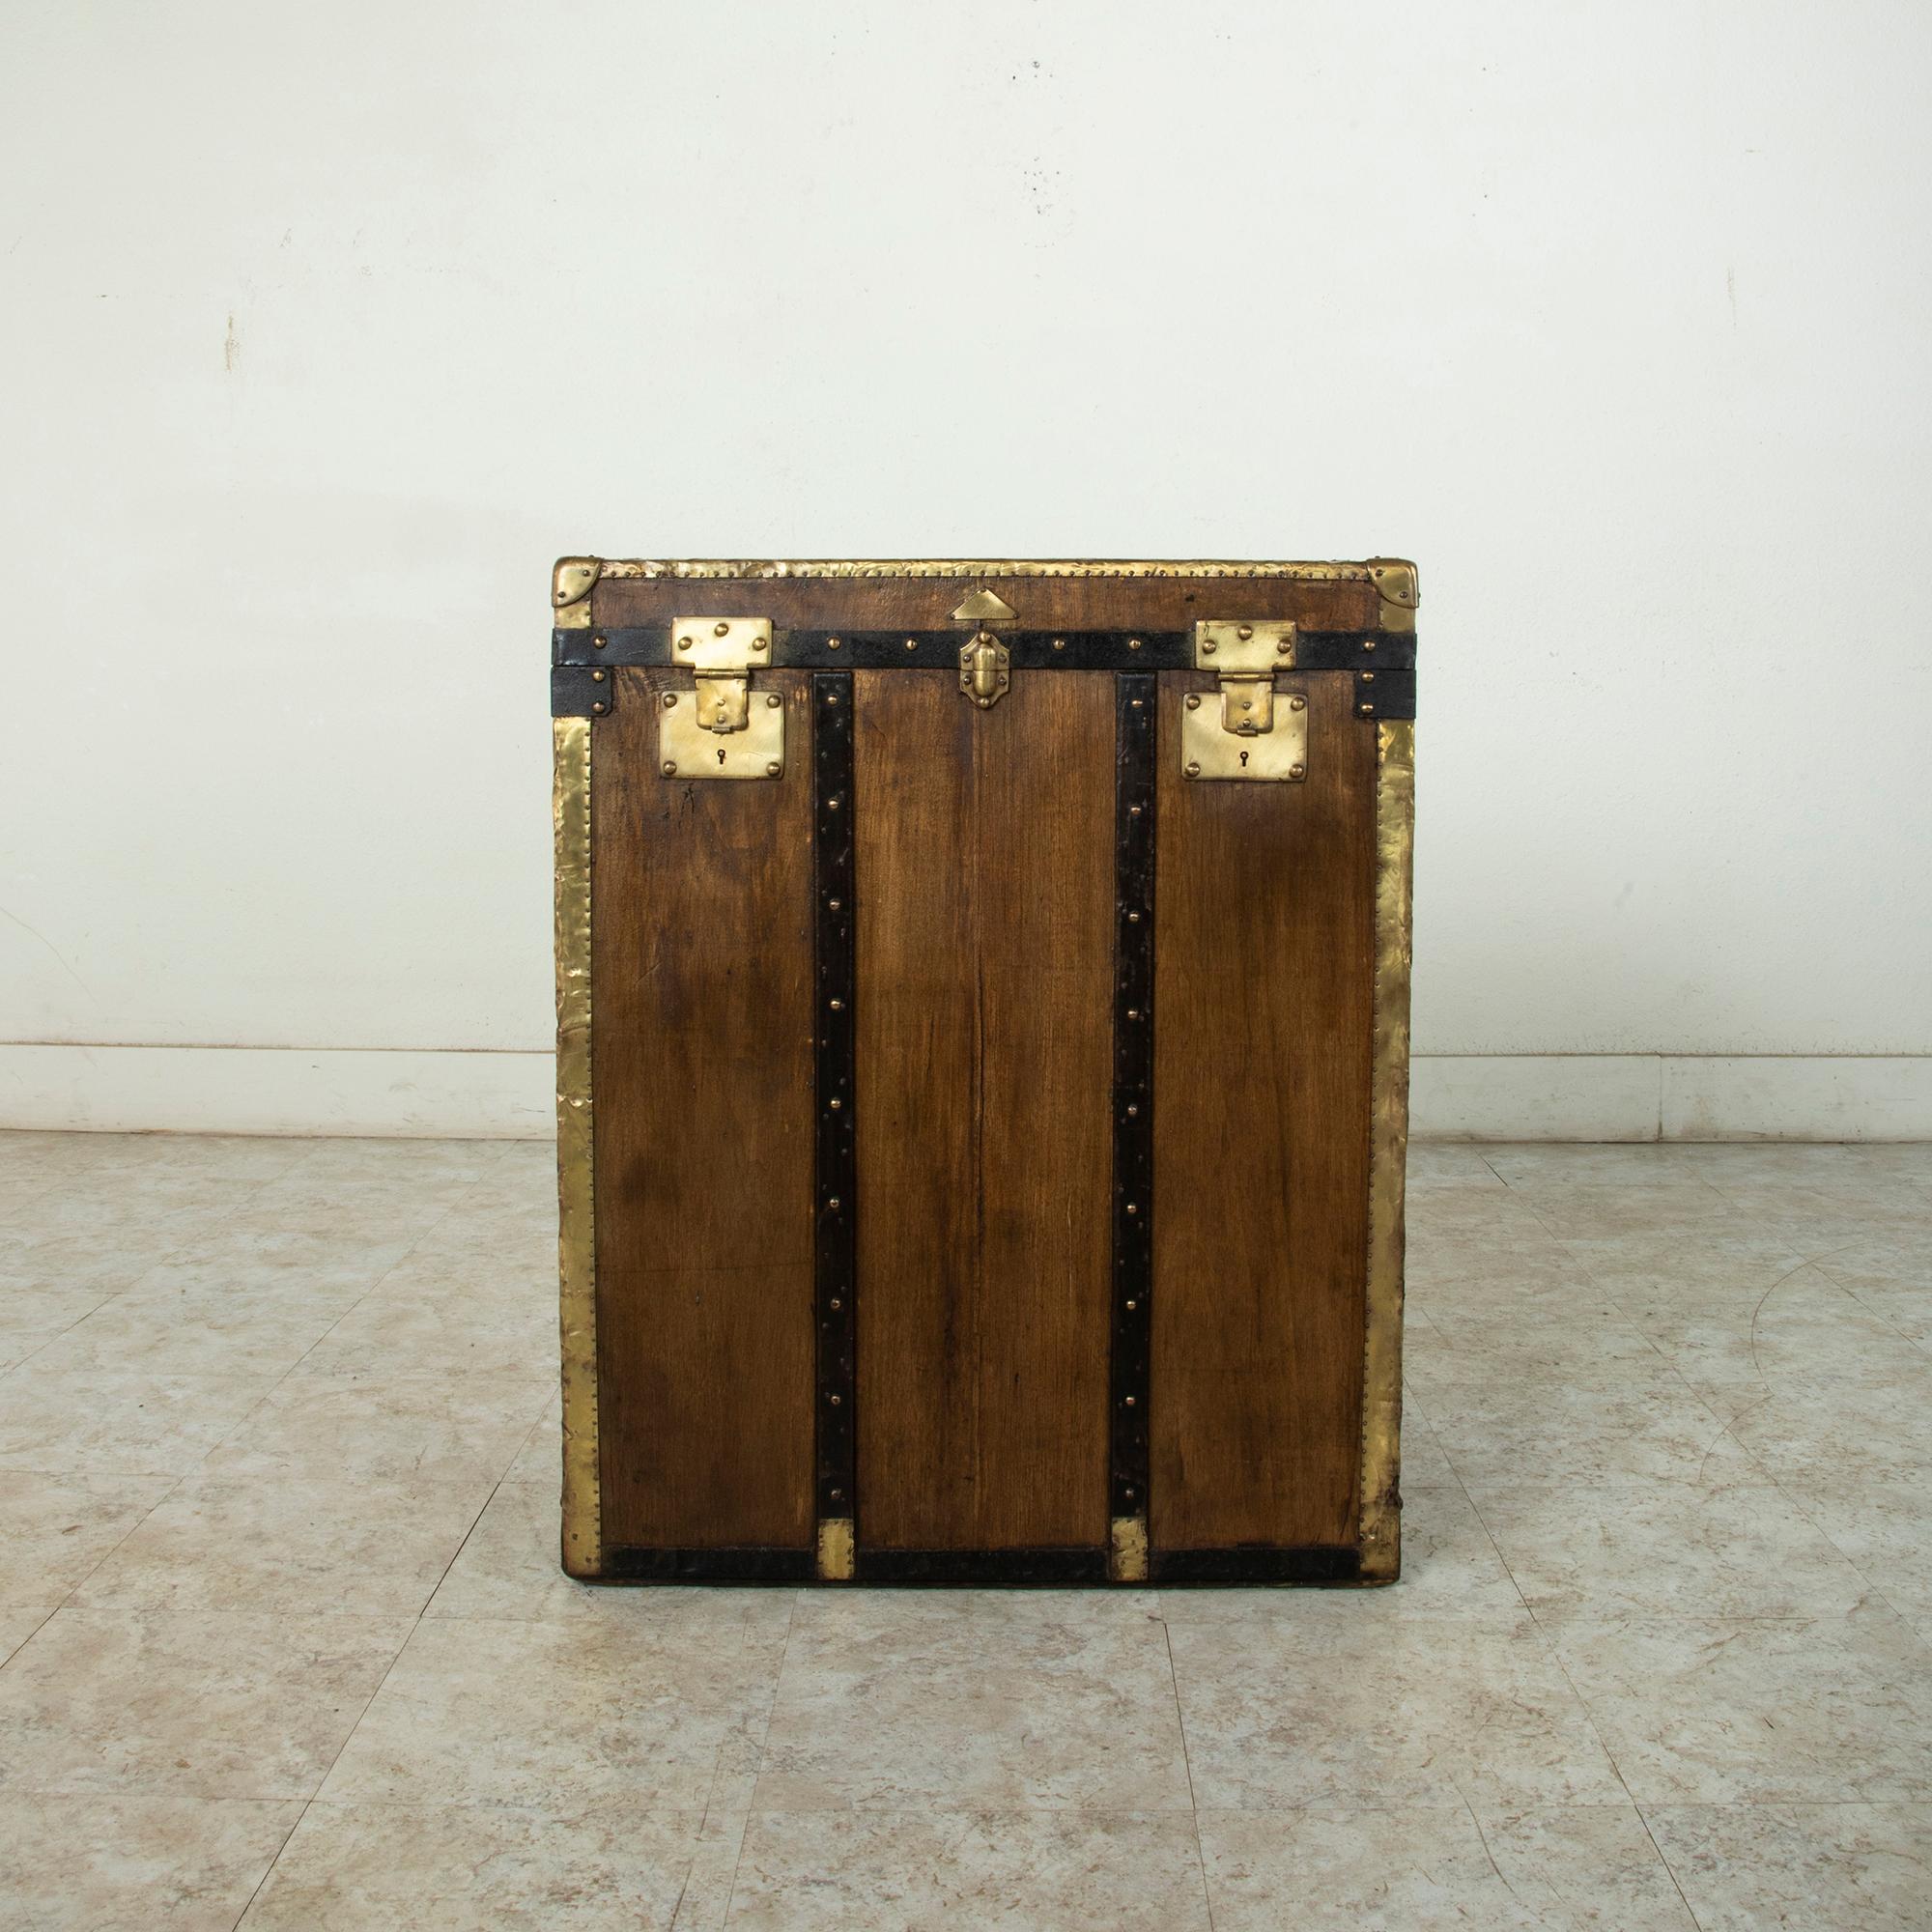 Standing at 34 inches in height, this tall early-20th century French beech wood steamer trunk features wooden runners with brass rivets and brass corners and edges. Iron straps surround the lid and base. Leather handles on the sides allow for easier